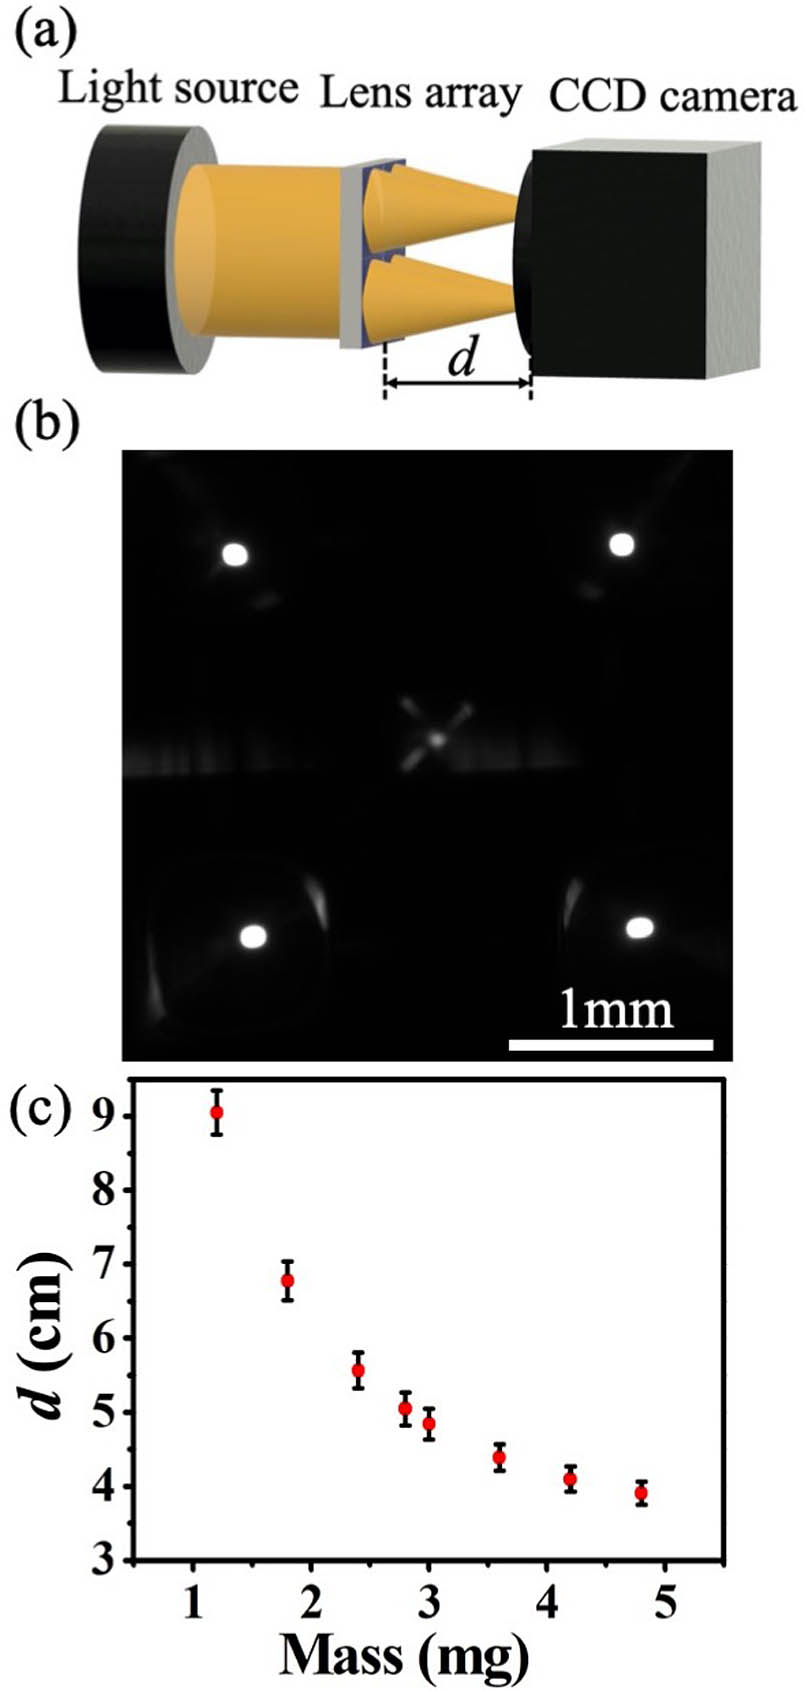 (a) Experimental setup for measuring the image distance. (b) Captured image of the focused light spots. (c) The relation between the image distance and the mass of the droplet.